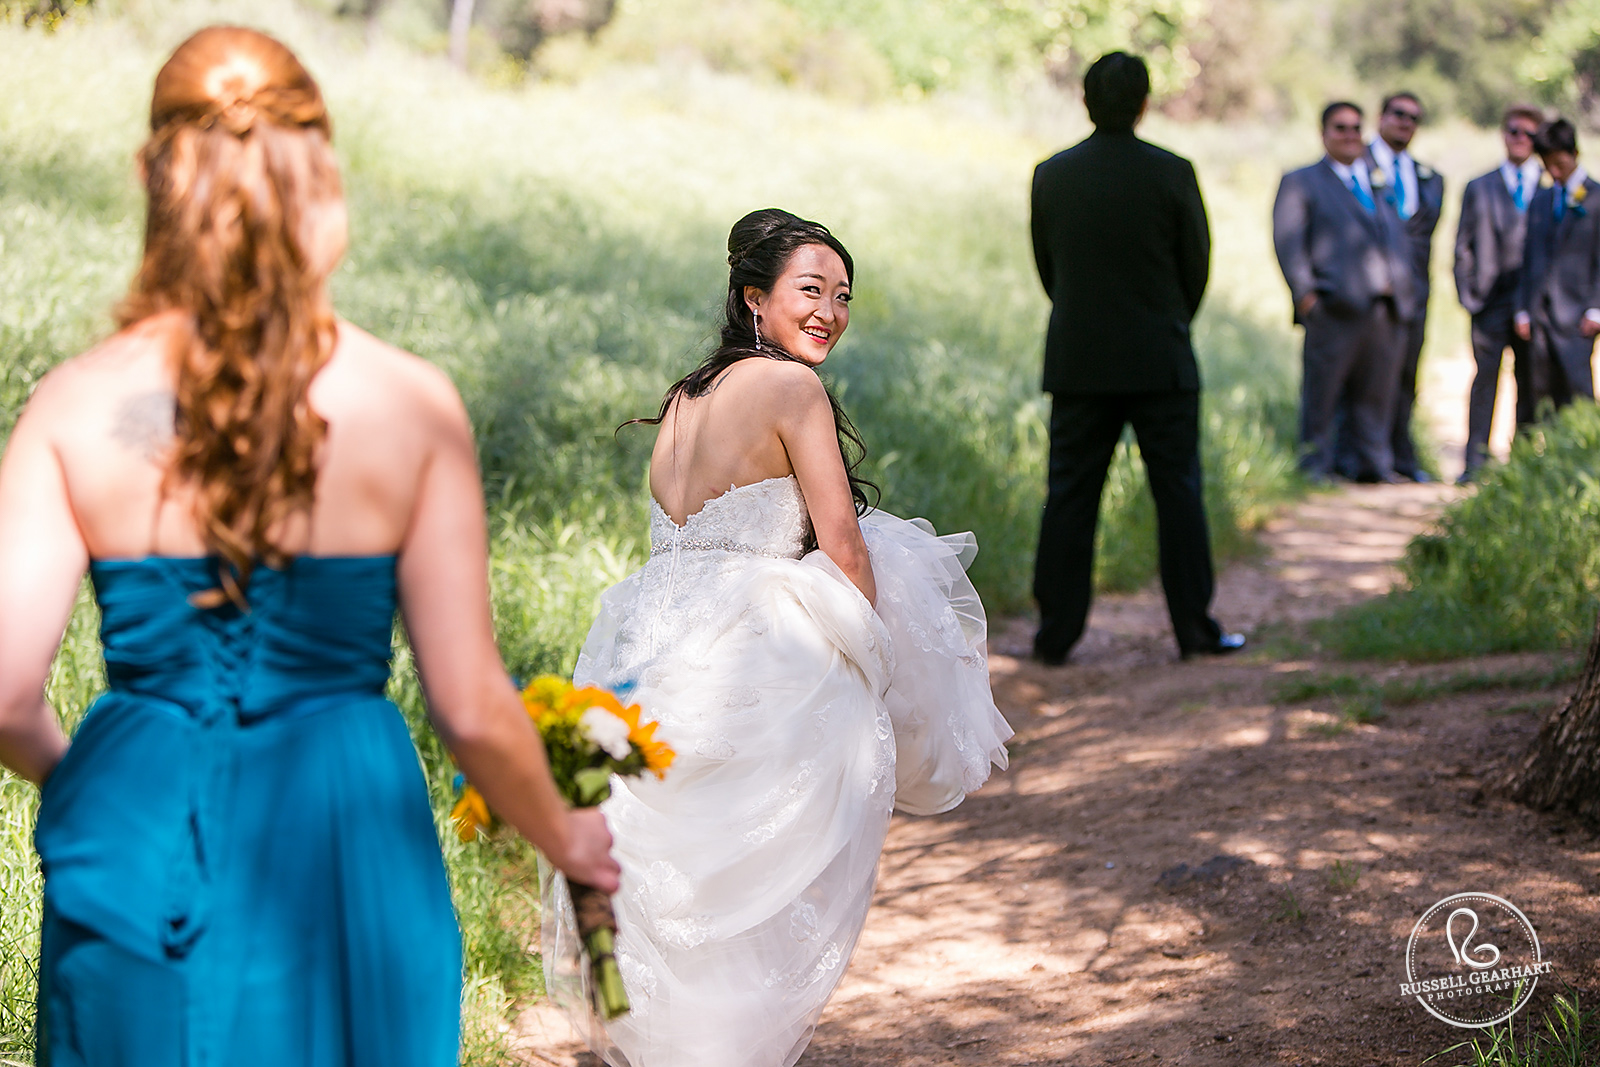 Bride sneaks up on groom for first look – Pasadena Wedding – Russell Gearhart Photography – www.gearhartphoto.com